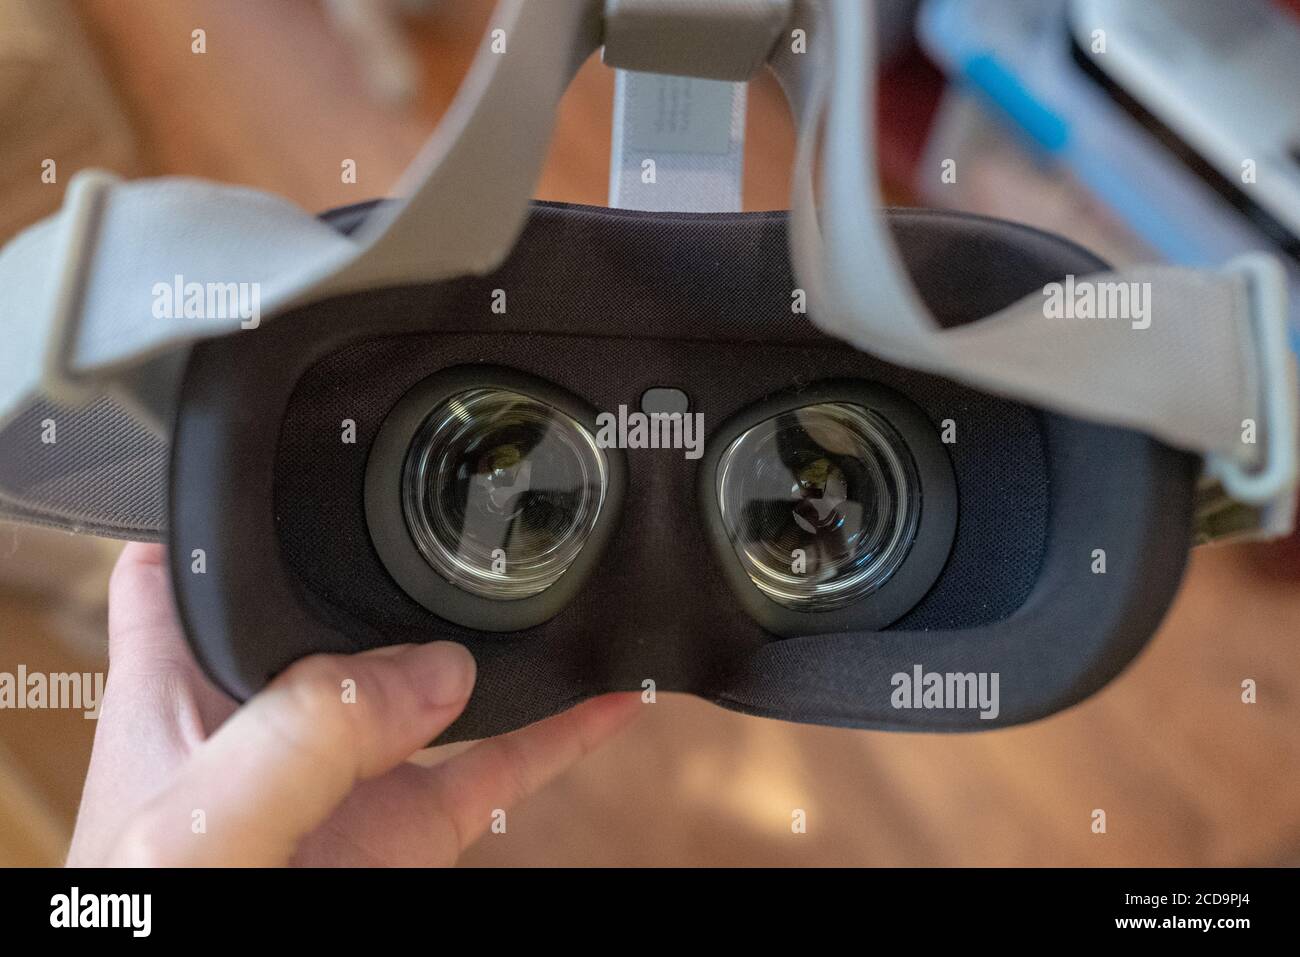 High angle view looking down into the eyepiece of an Oculus Go virtual reality headset, as if in process of putting headset on, San Ramon, California, June 18, 2020. () Stock Photo